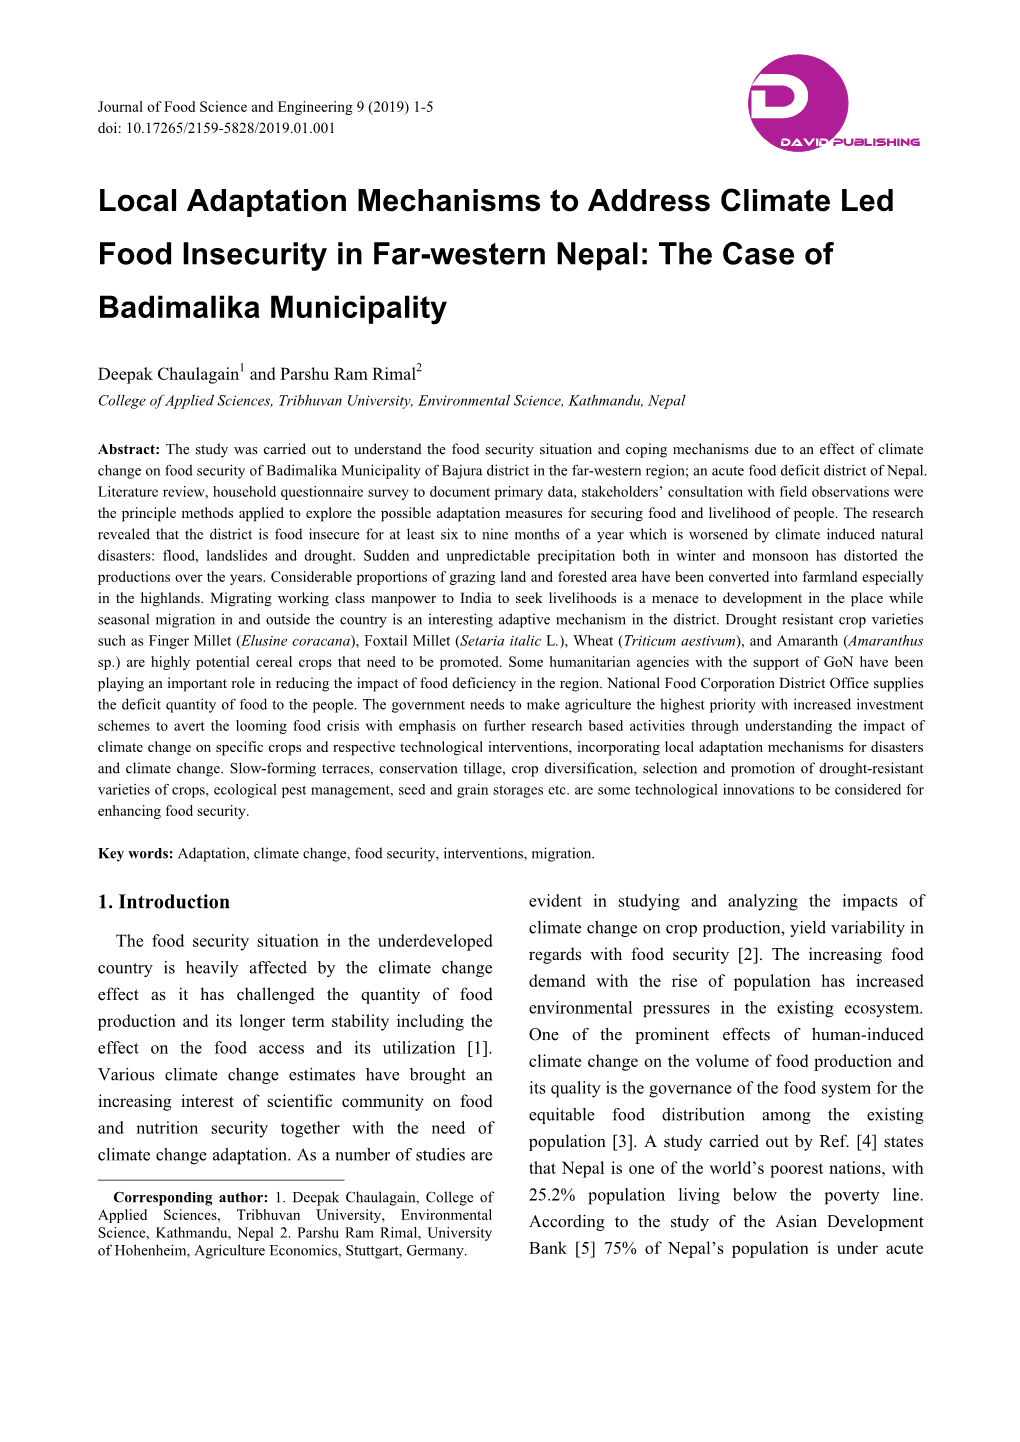 Local Adaptation Mechanisms to Address Climate Led Food Insecurity in Far-Western Nepal: the Case of Badimalika Municipality